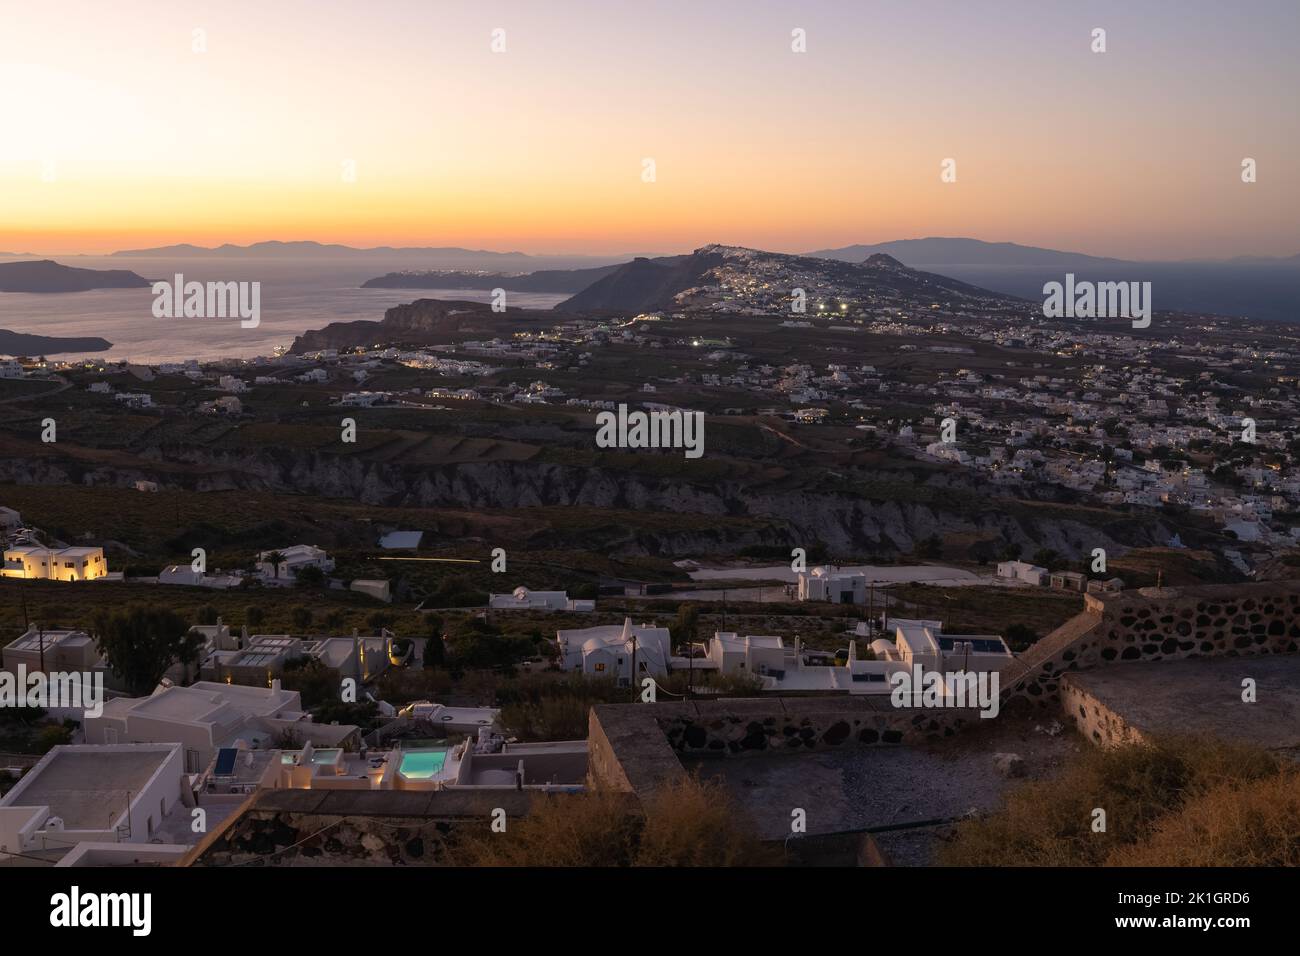 Cityscape and countryside view of Thera, the capital city of Santorini in the Greek Islands of Greece, on a hilltop of volcanic rock during colourful Stock Photo